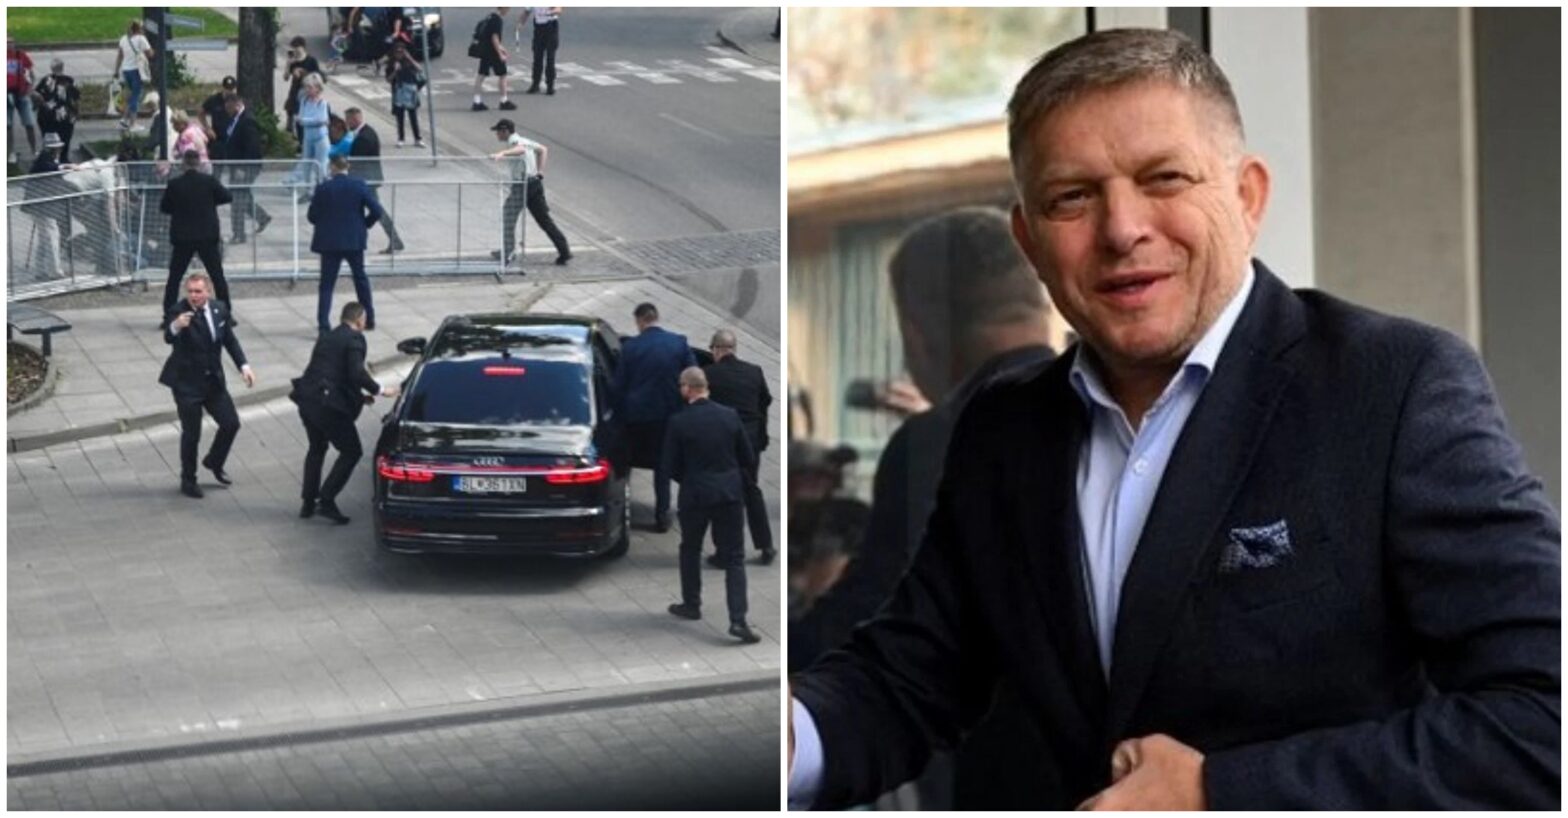 Slovakia's PM Robert Fico Injured in Shooting